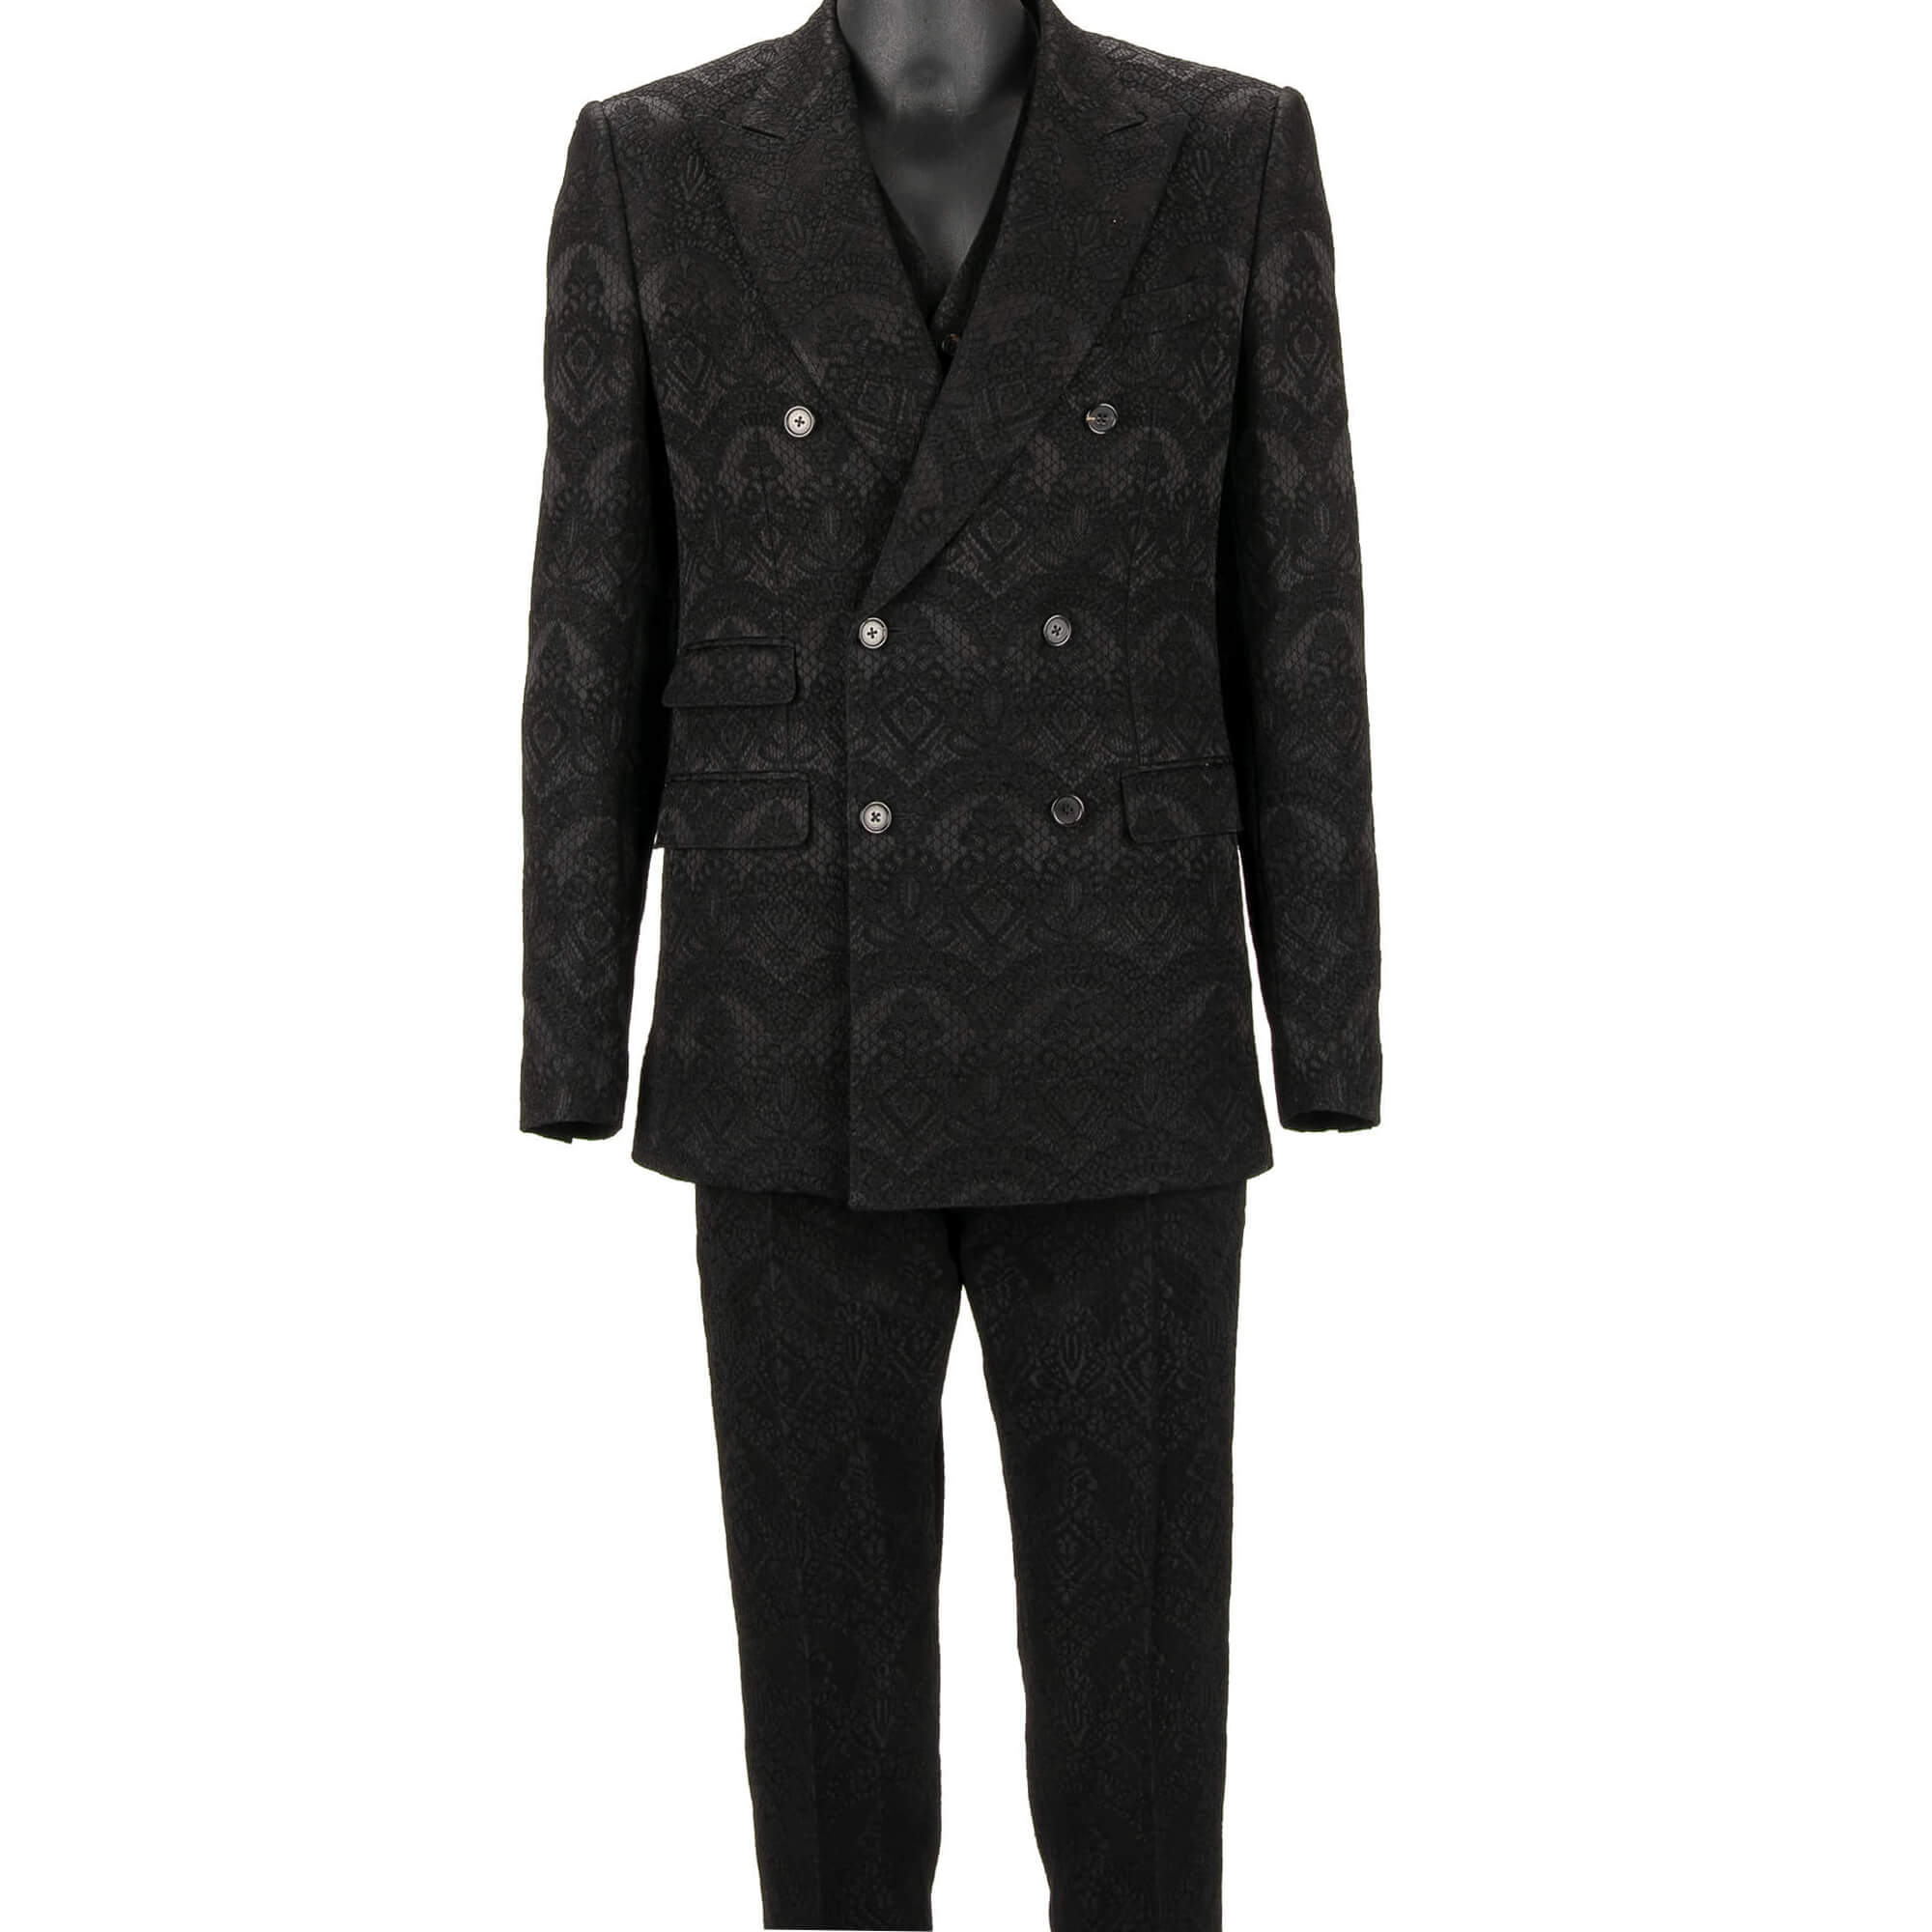 Dolce & Gabbana Jacquard Double breasted 3 Piece Suit Jacket Black